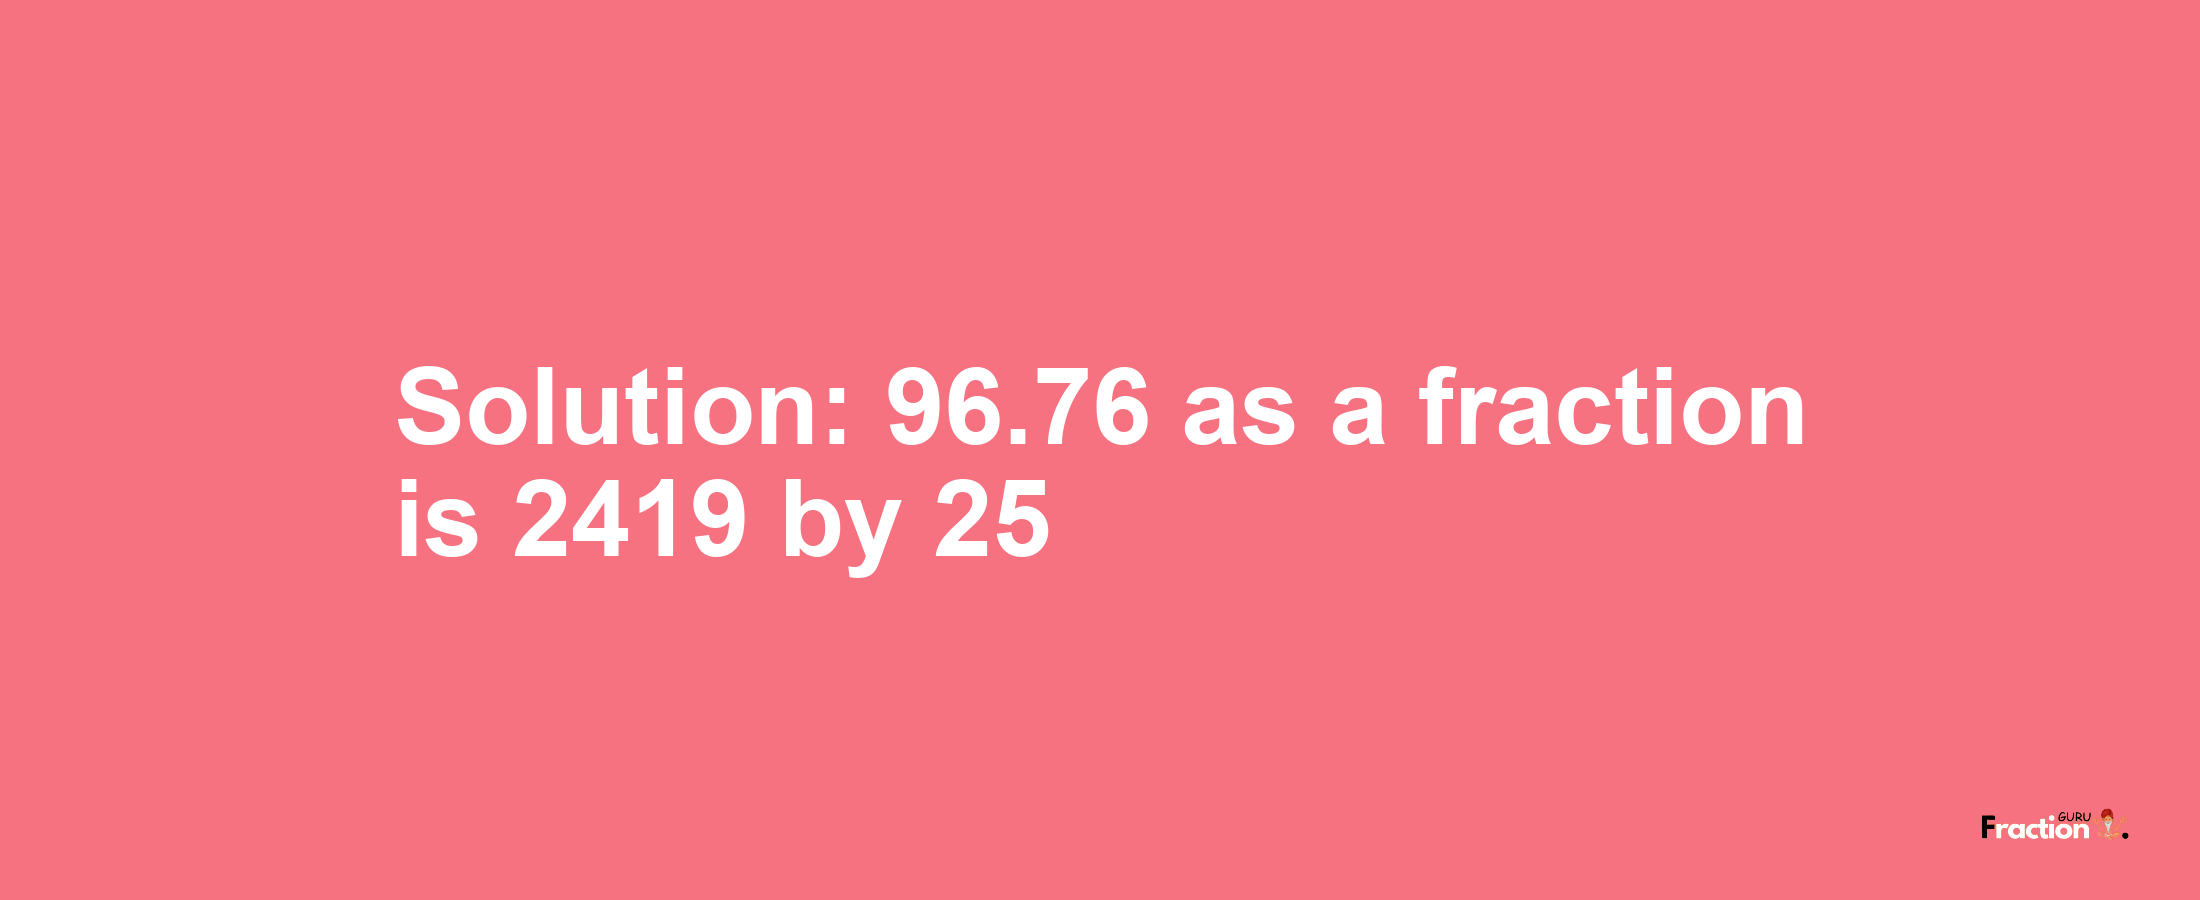 Solution:96.76 as a fraction is 2419/25